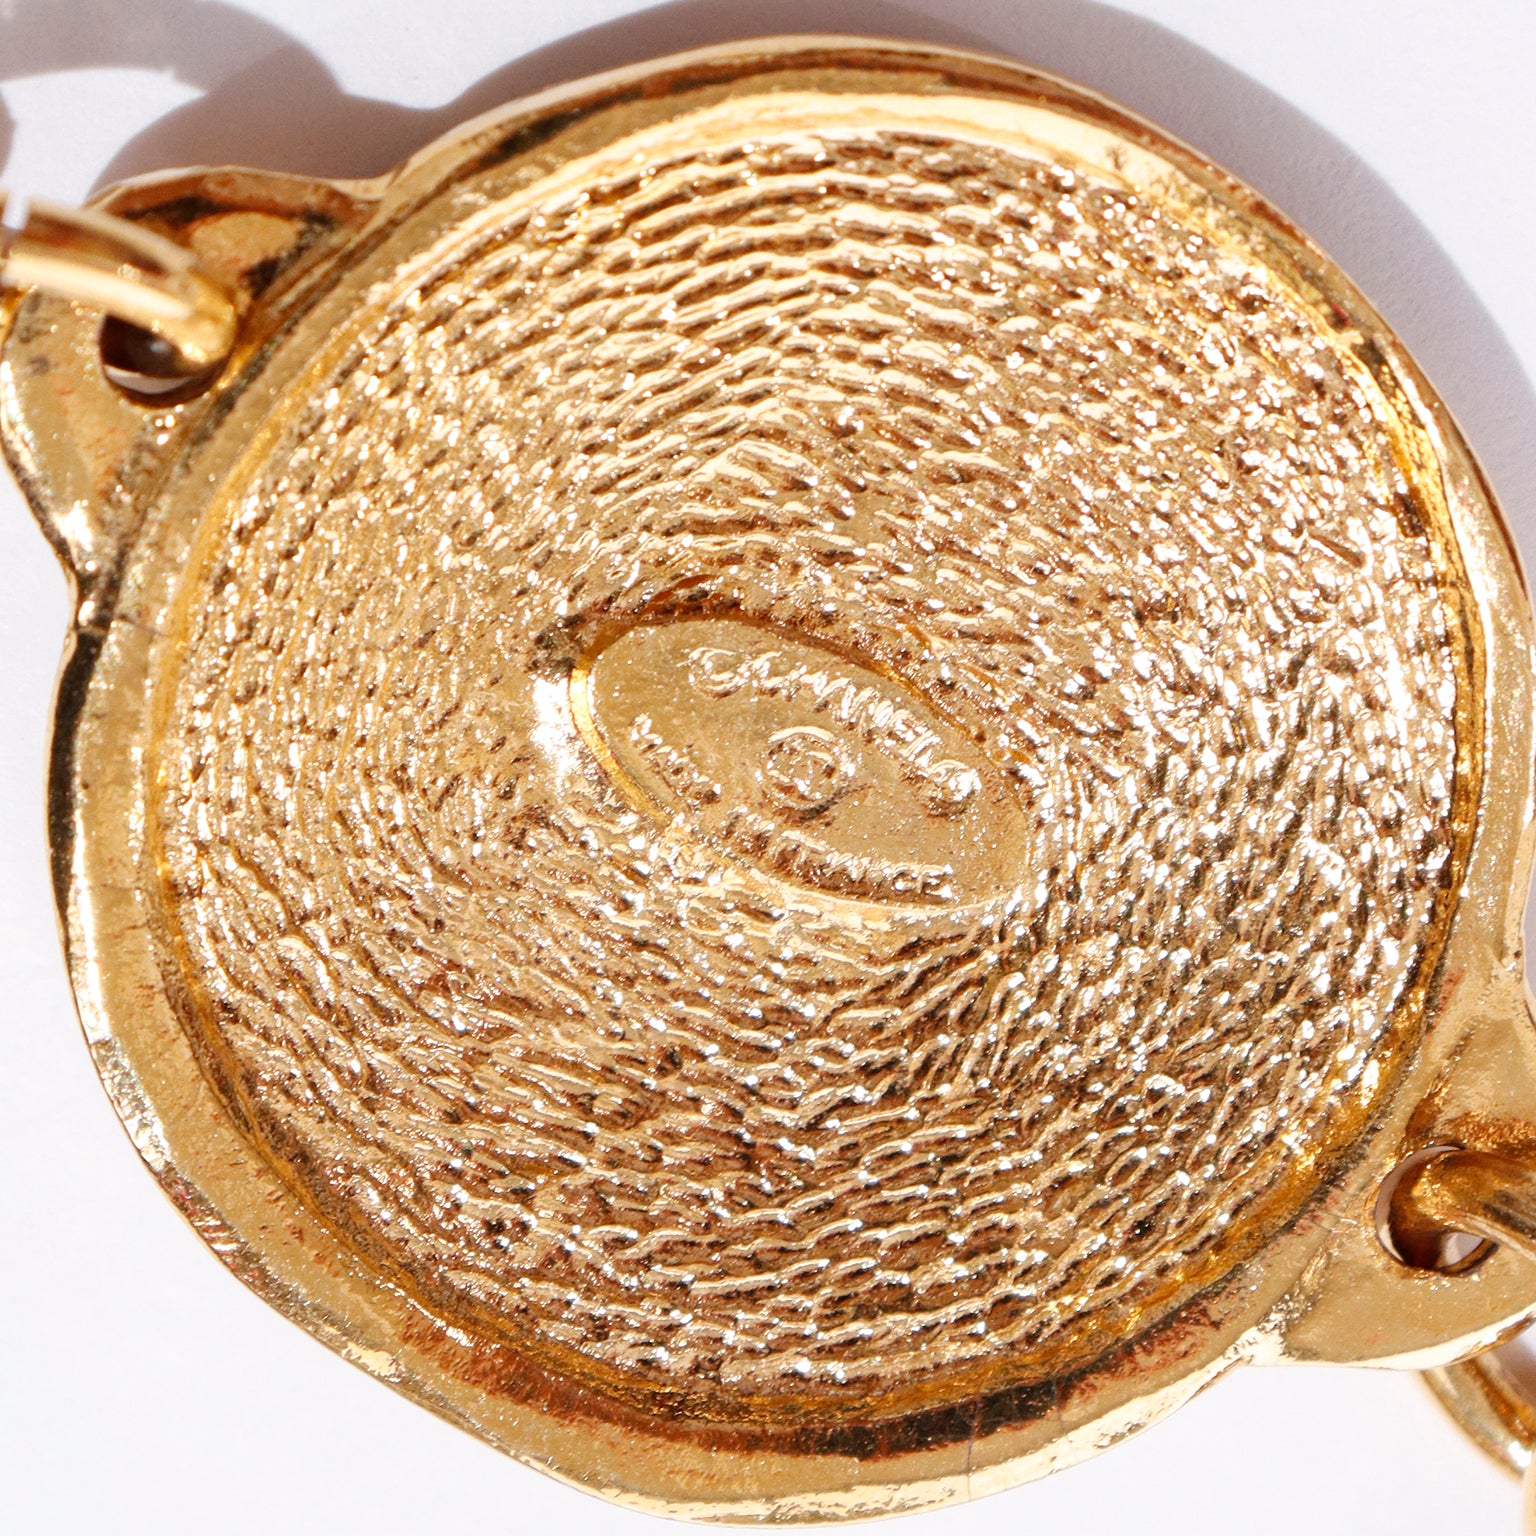 1980s Chanel 31 Rue Cambon Paris Vintage Gold Plated Belt or Necklace